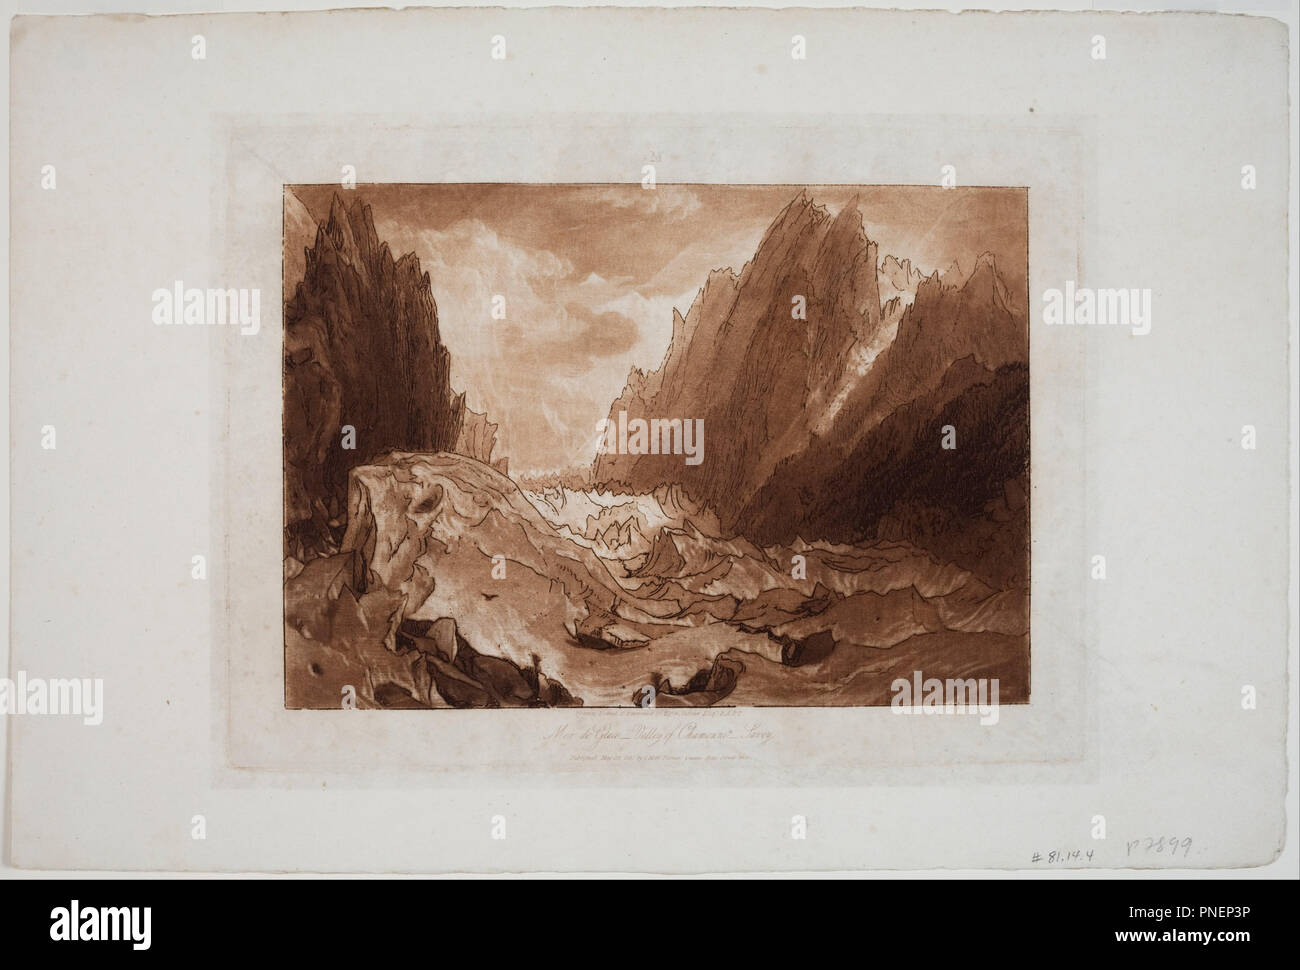 Mer de Glace - Valley of Chamonix - Savoy, from the Liber Studiorum. Date/Period: 1812. Print. Mezzotint and etching in sepia-color ink. Height: 216 mm (8.50 in); Width: 293 mm (11.53 in). Author: J. M. W. Turner. TURNER, JOSEPH MALLORD WILLIAM. Stock Photo